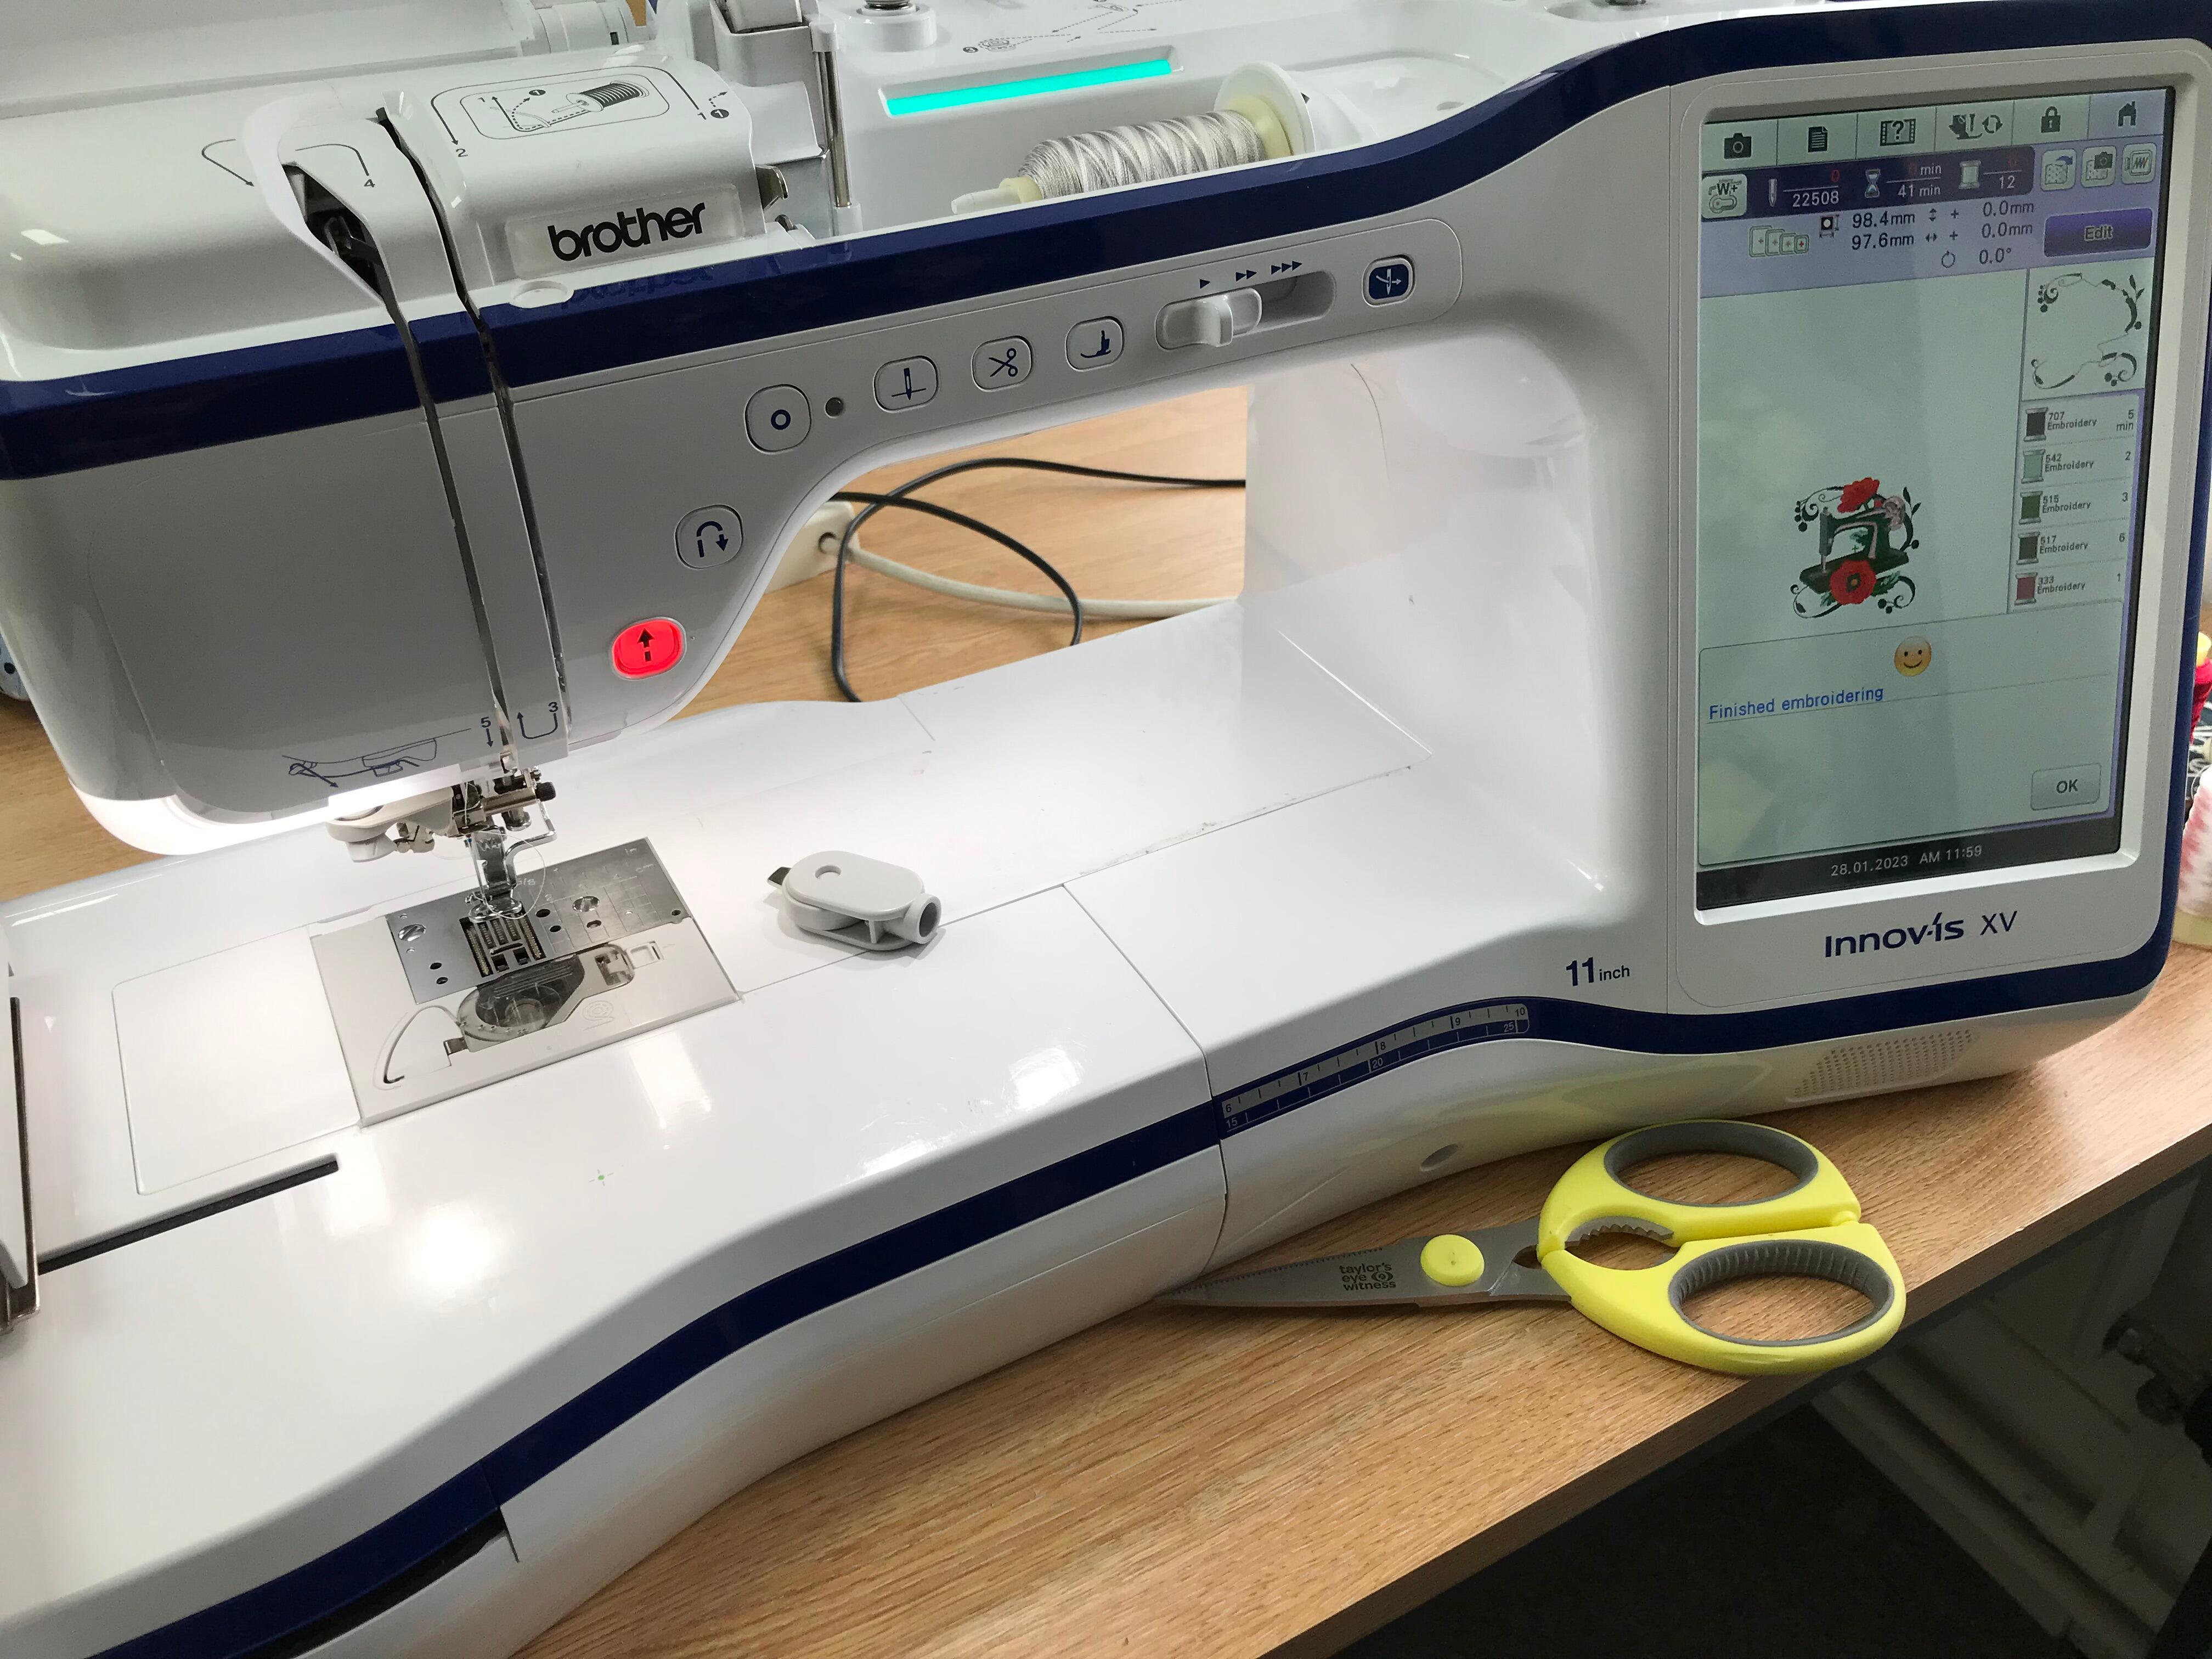 Monthly embroidery class